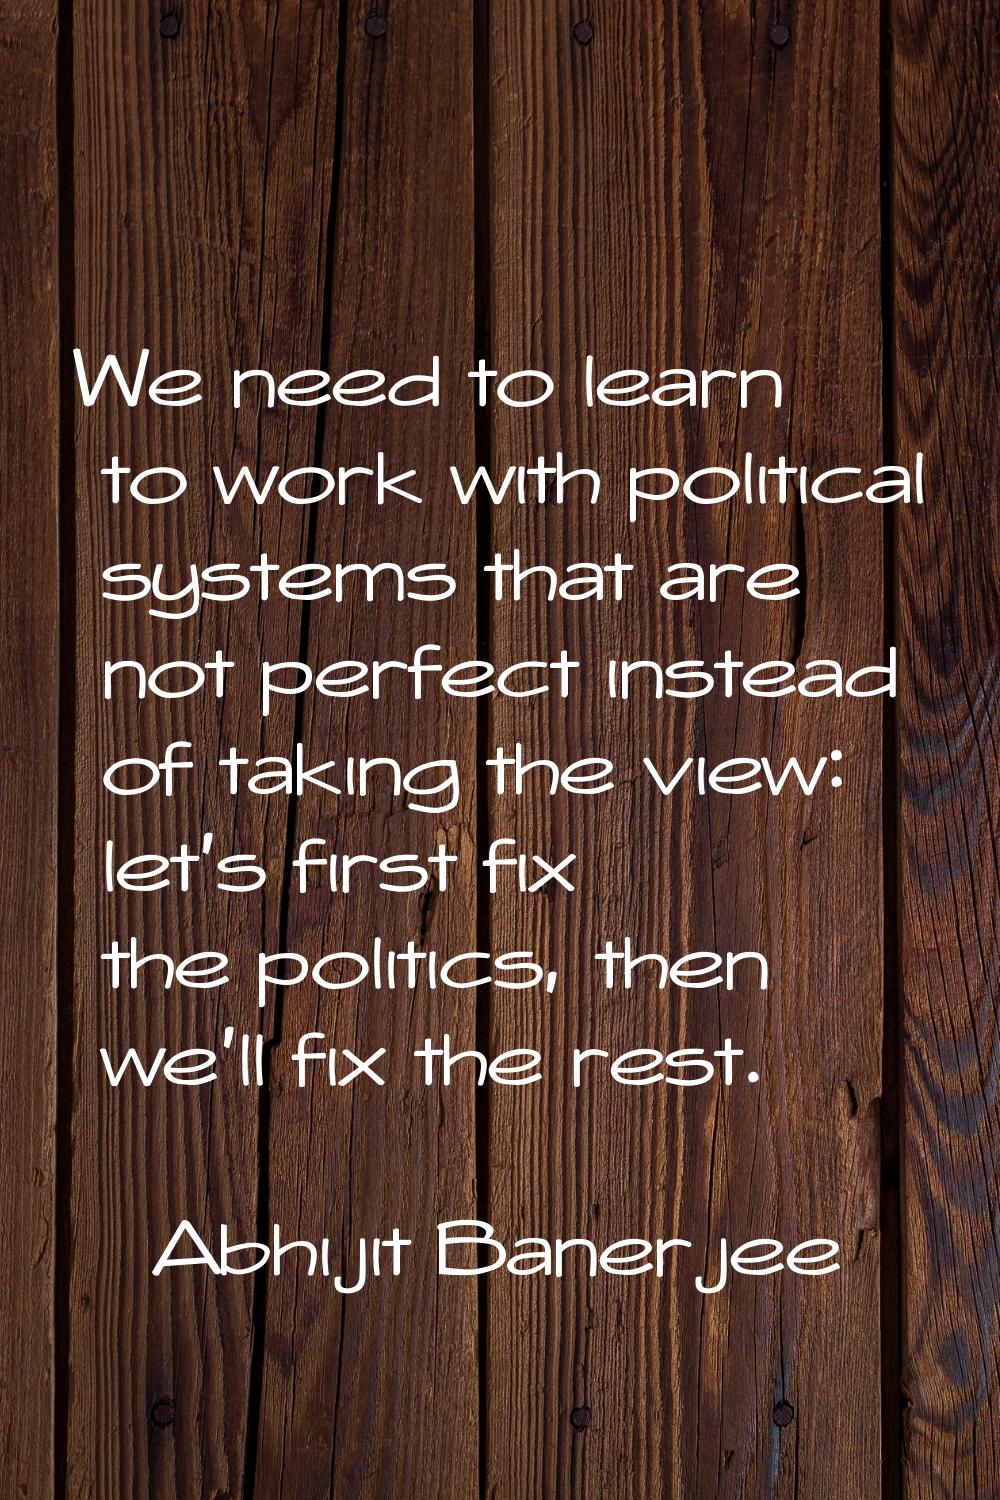 We need to learn to work with political systems that are not perfect instead of taking the view: le